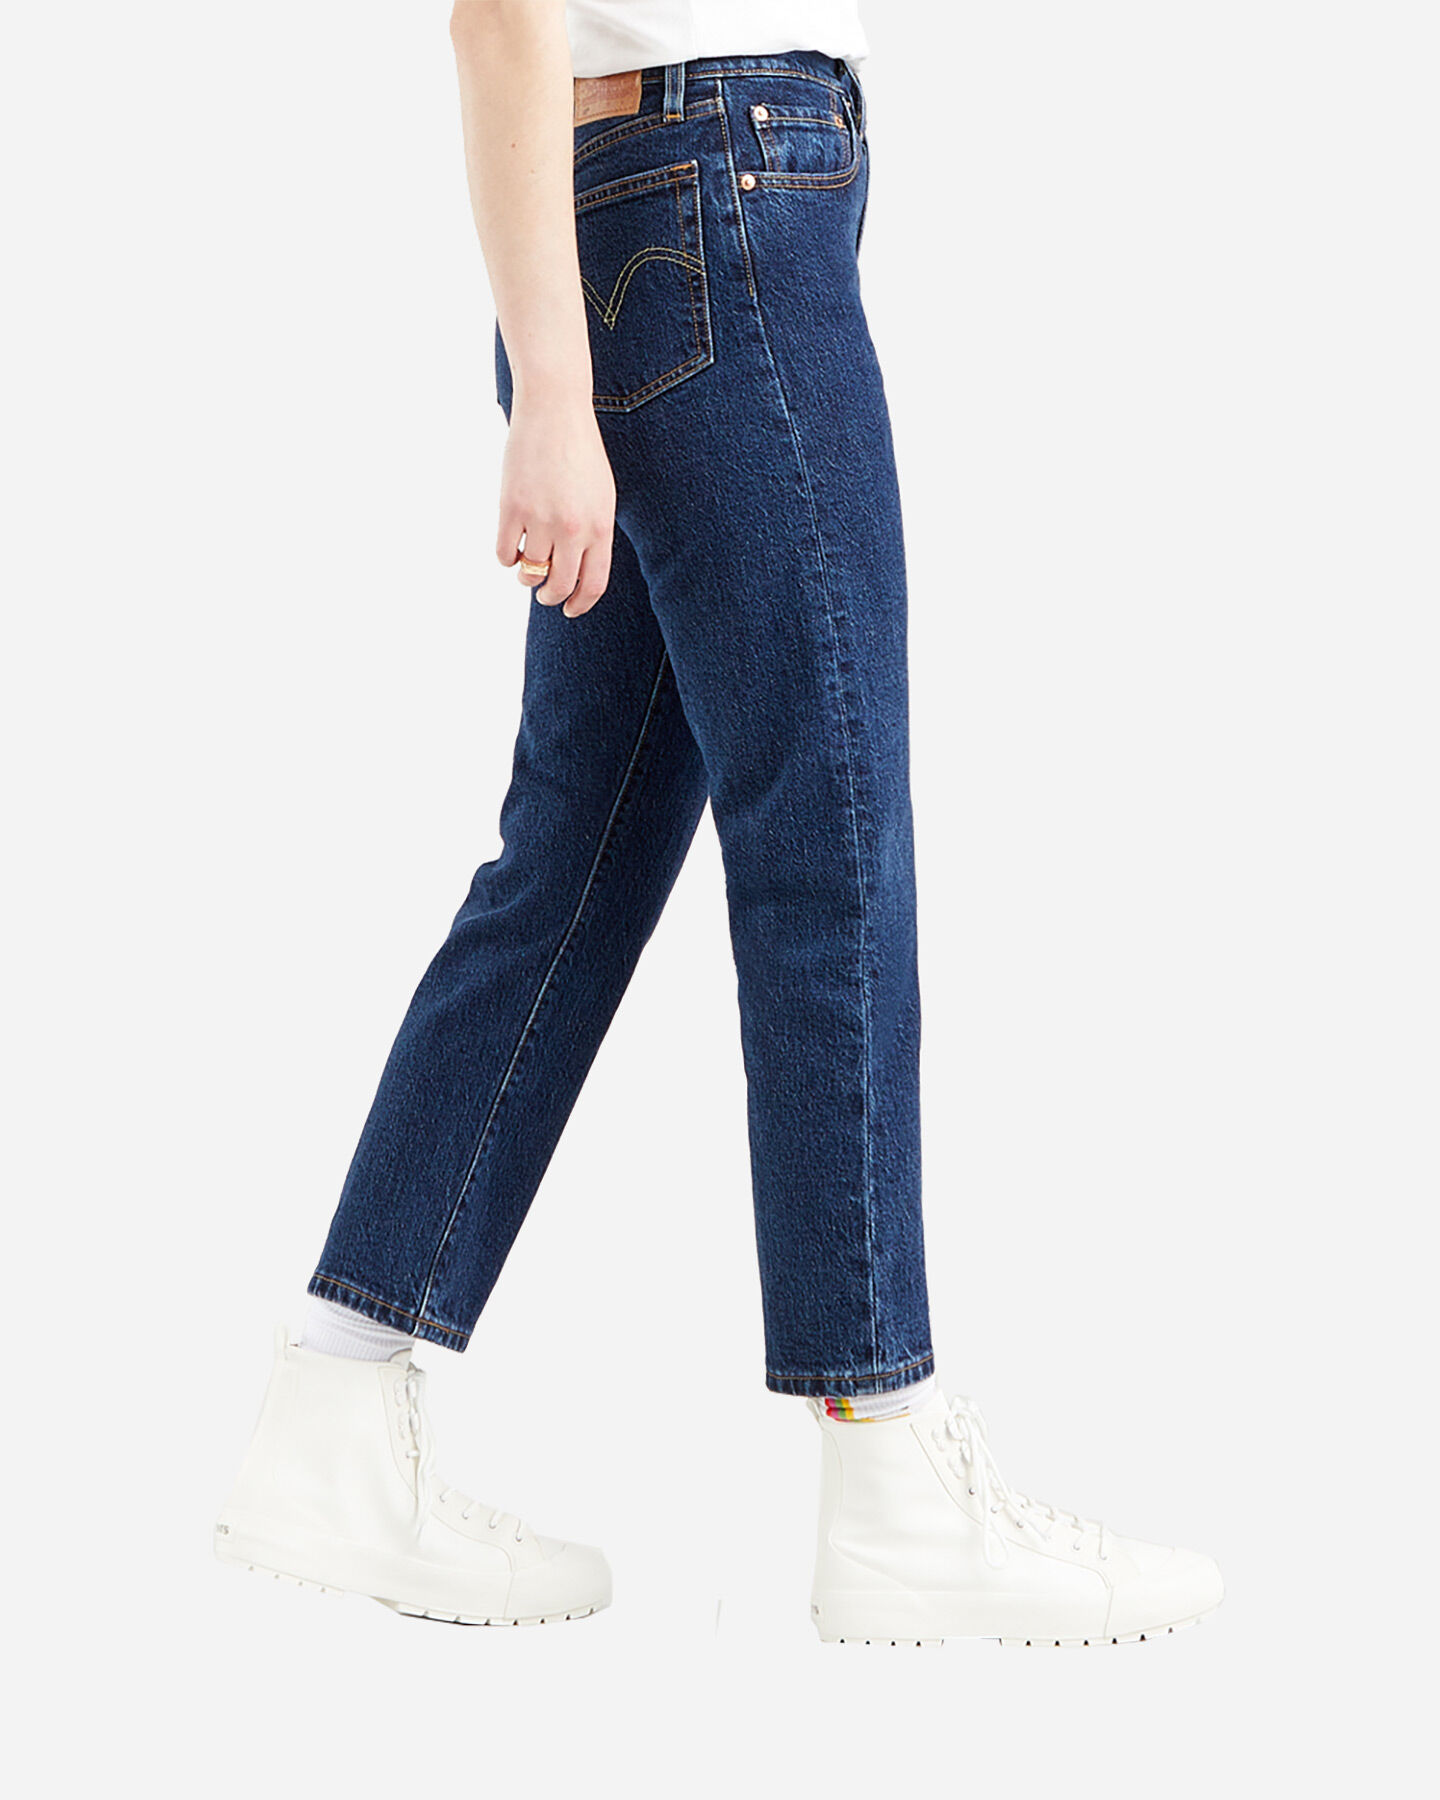  Jeans LEVI'S 501 CROP W S4097261|0179|25 scatto 1